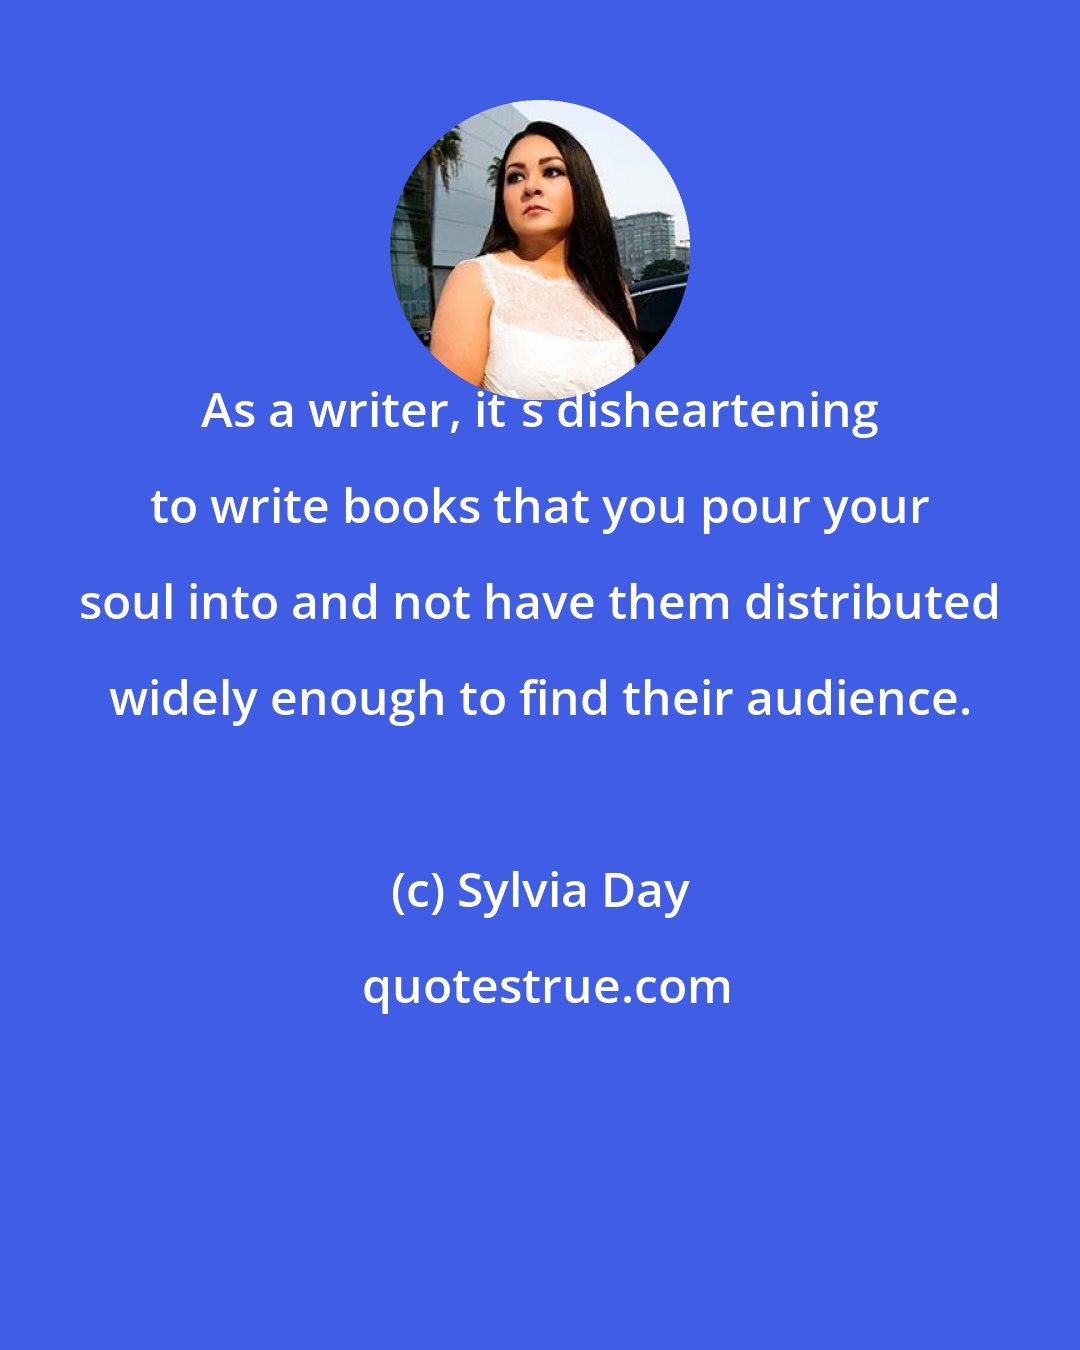 Sylvia Day: As a writer, it's disheartening to write books that you pour your soul into and not have them distributed widely enough to find their audience.